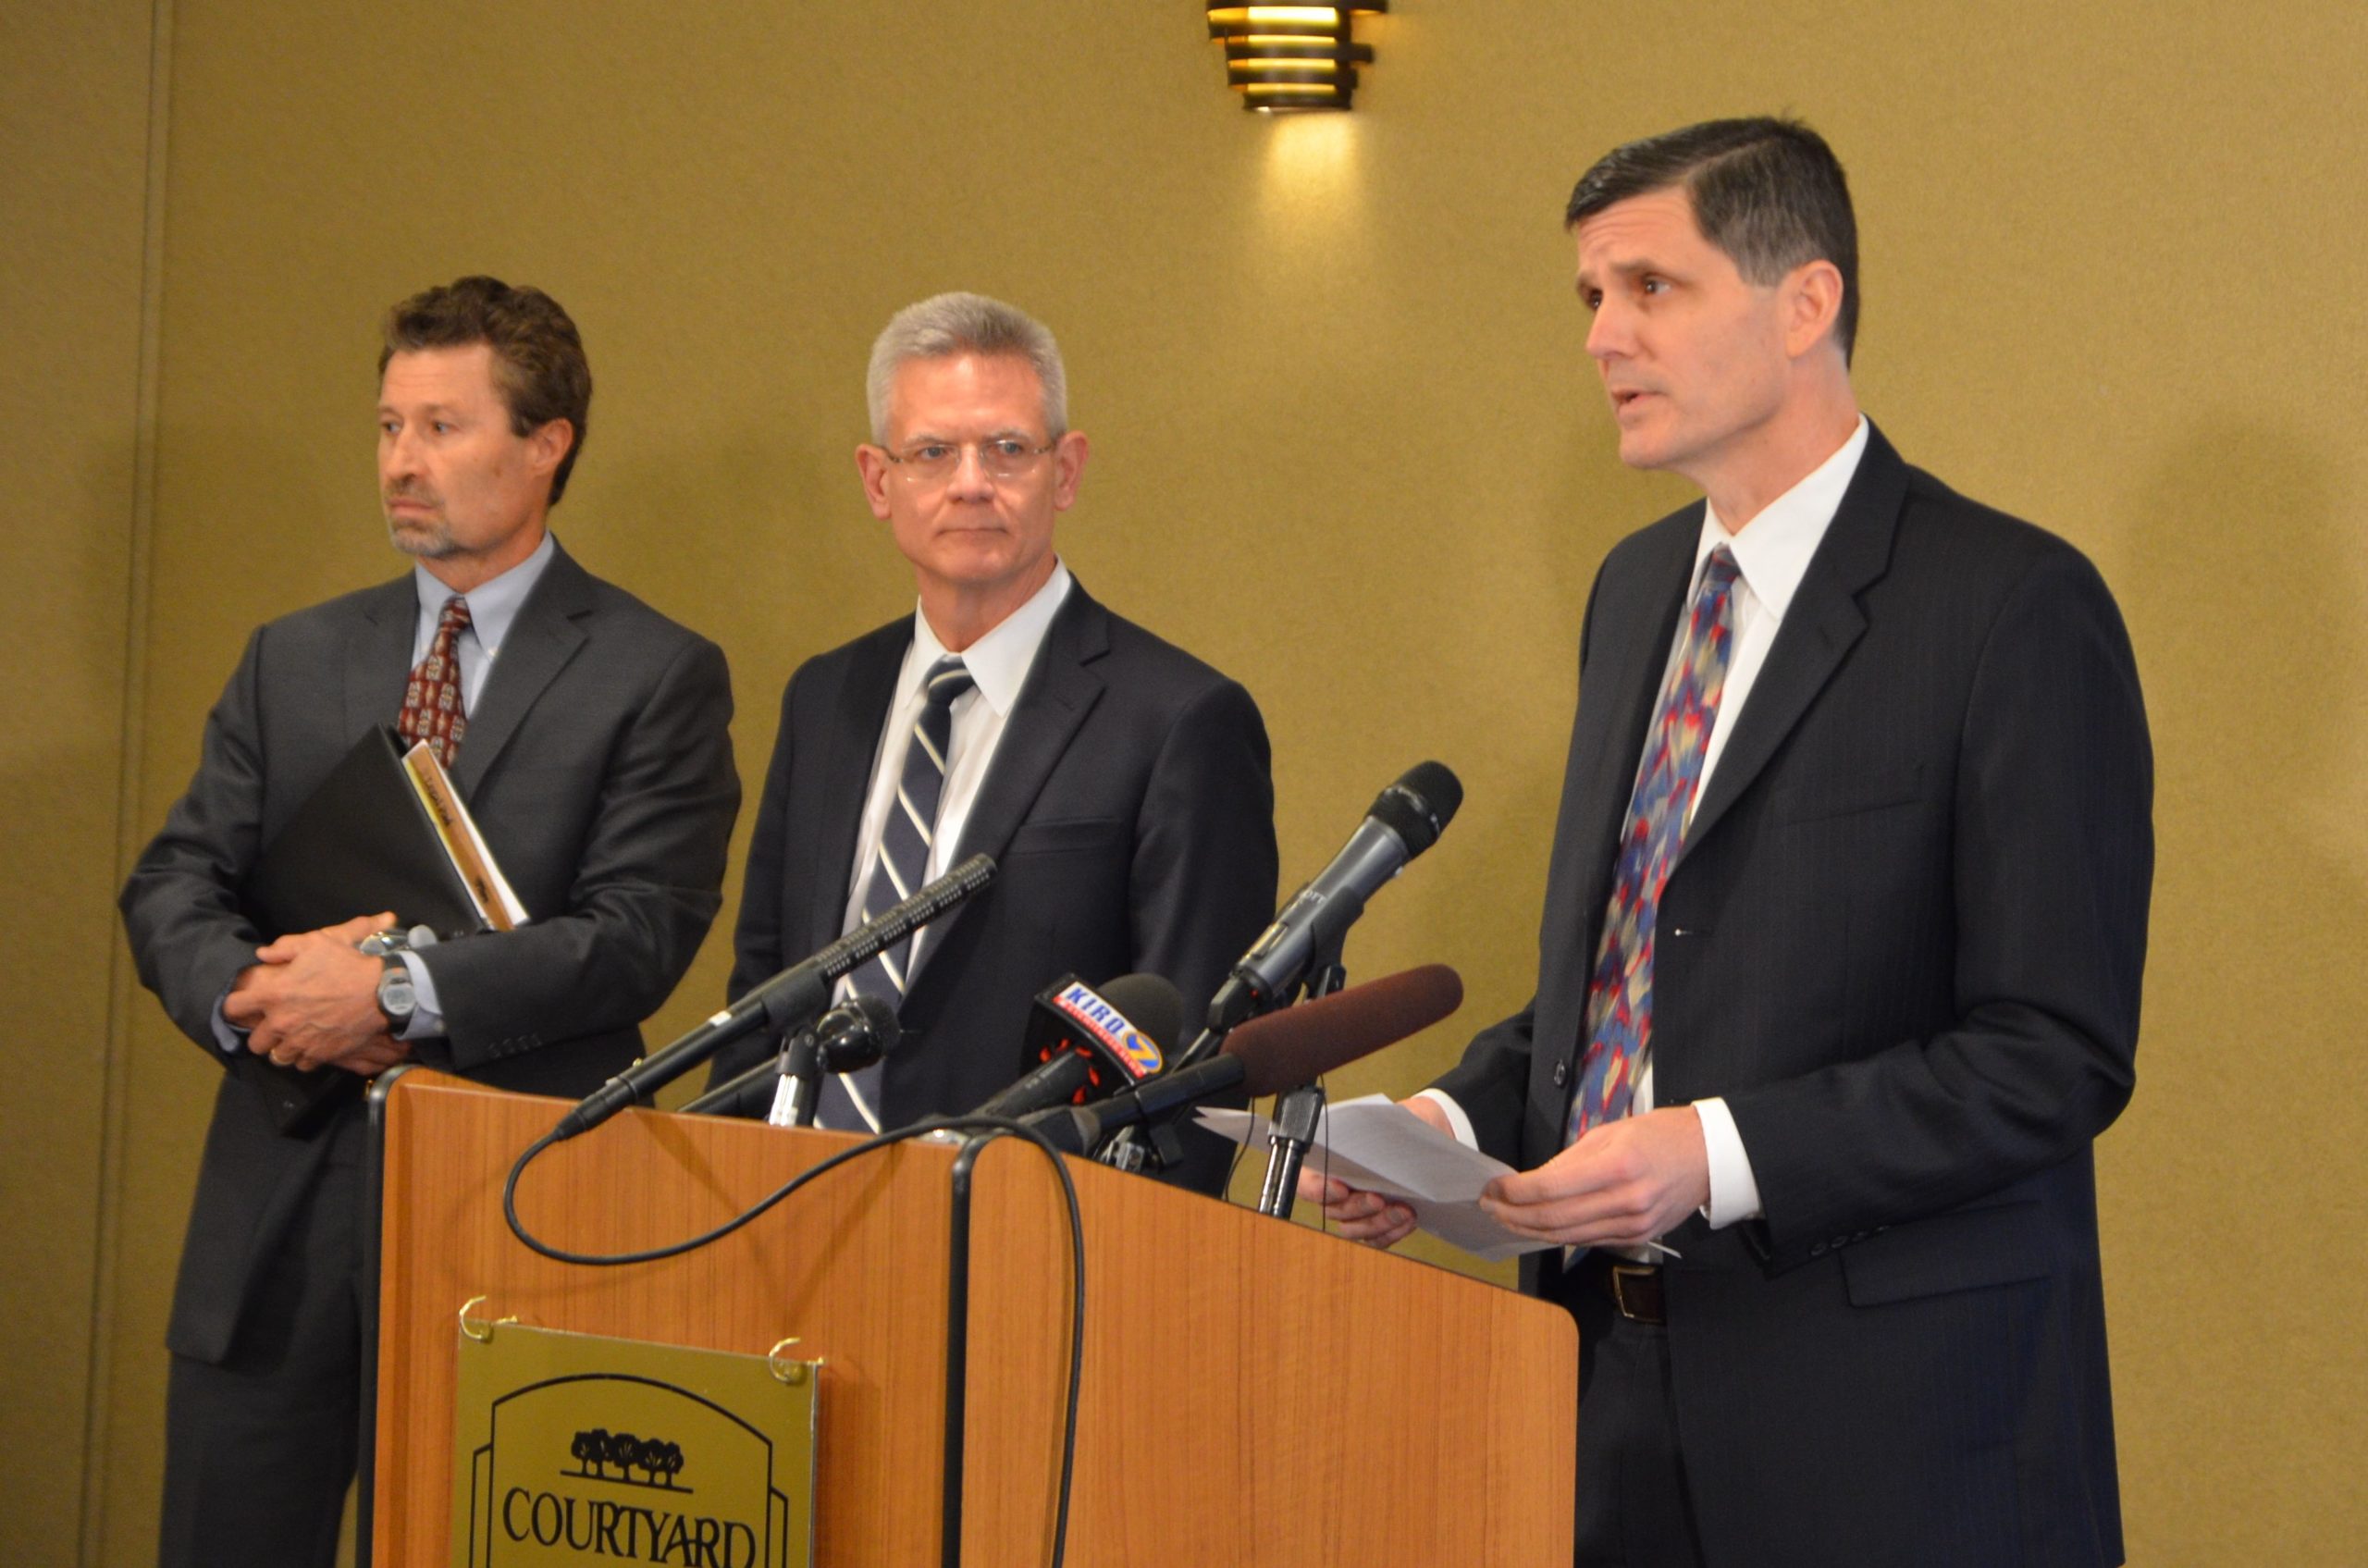 State Auditor Troy Kelley, behind the podium, addresses reporters as his attorneys (l-r) Rob McCallum and Mark Bartlett, look on. (Photo by Venice Buhain)